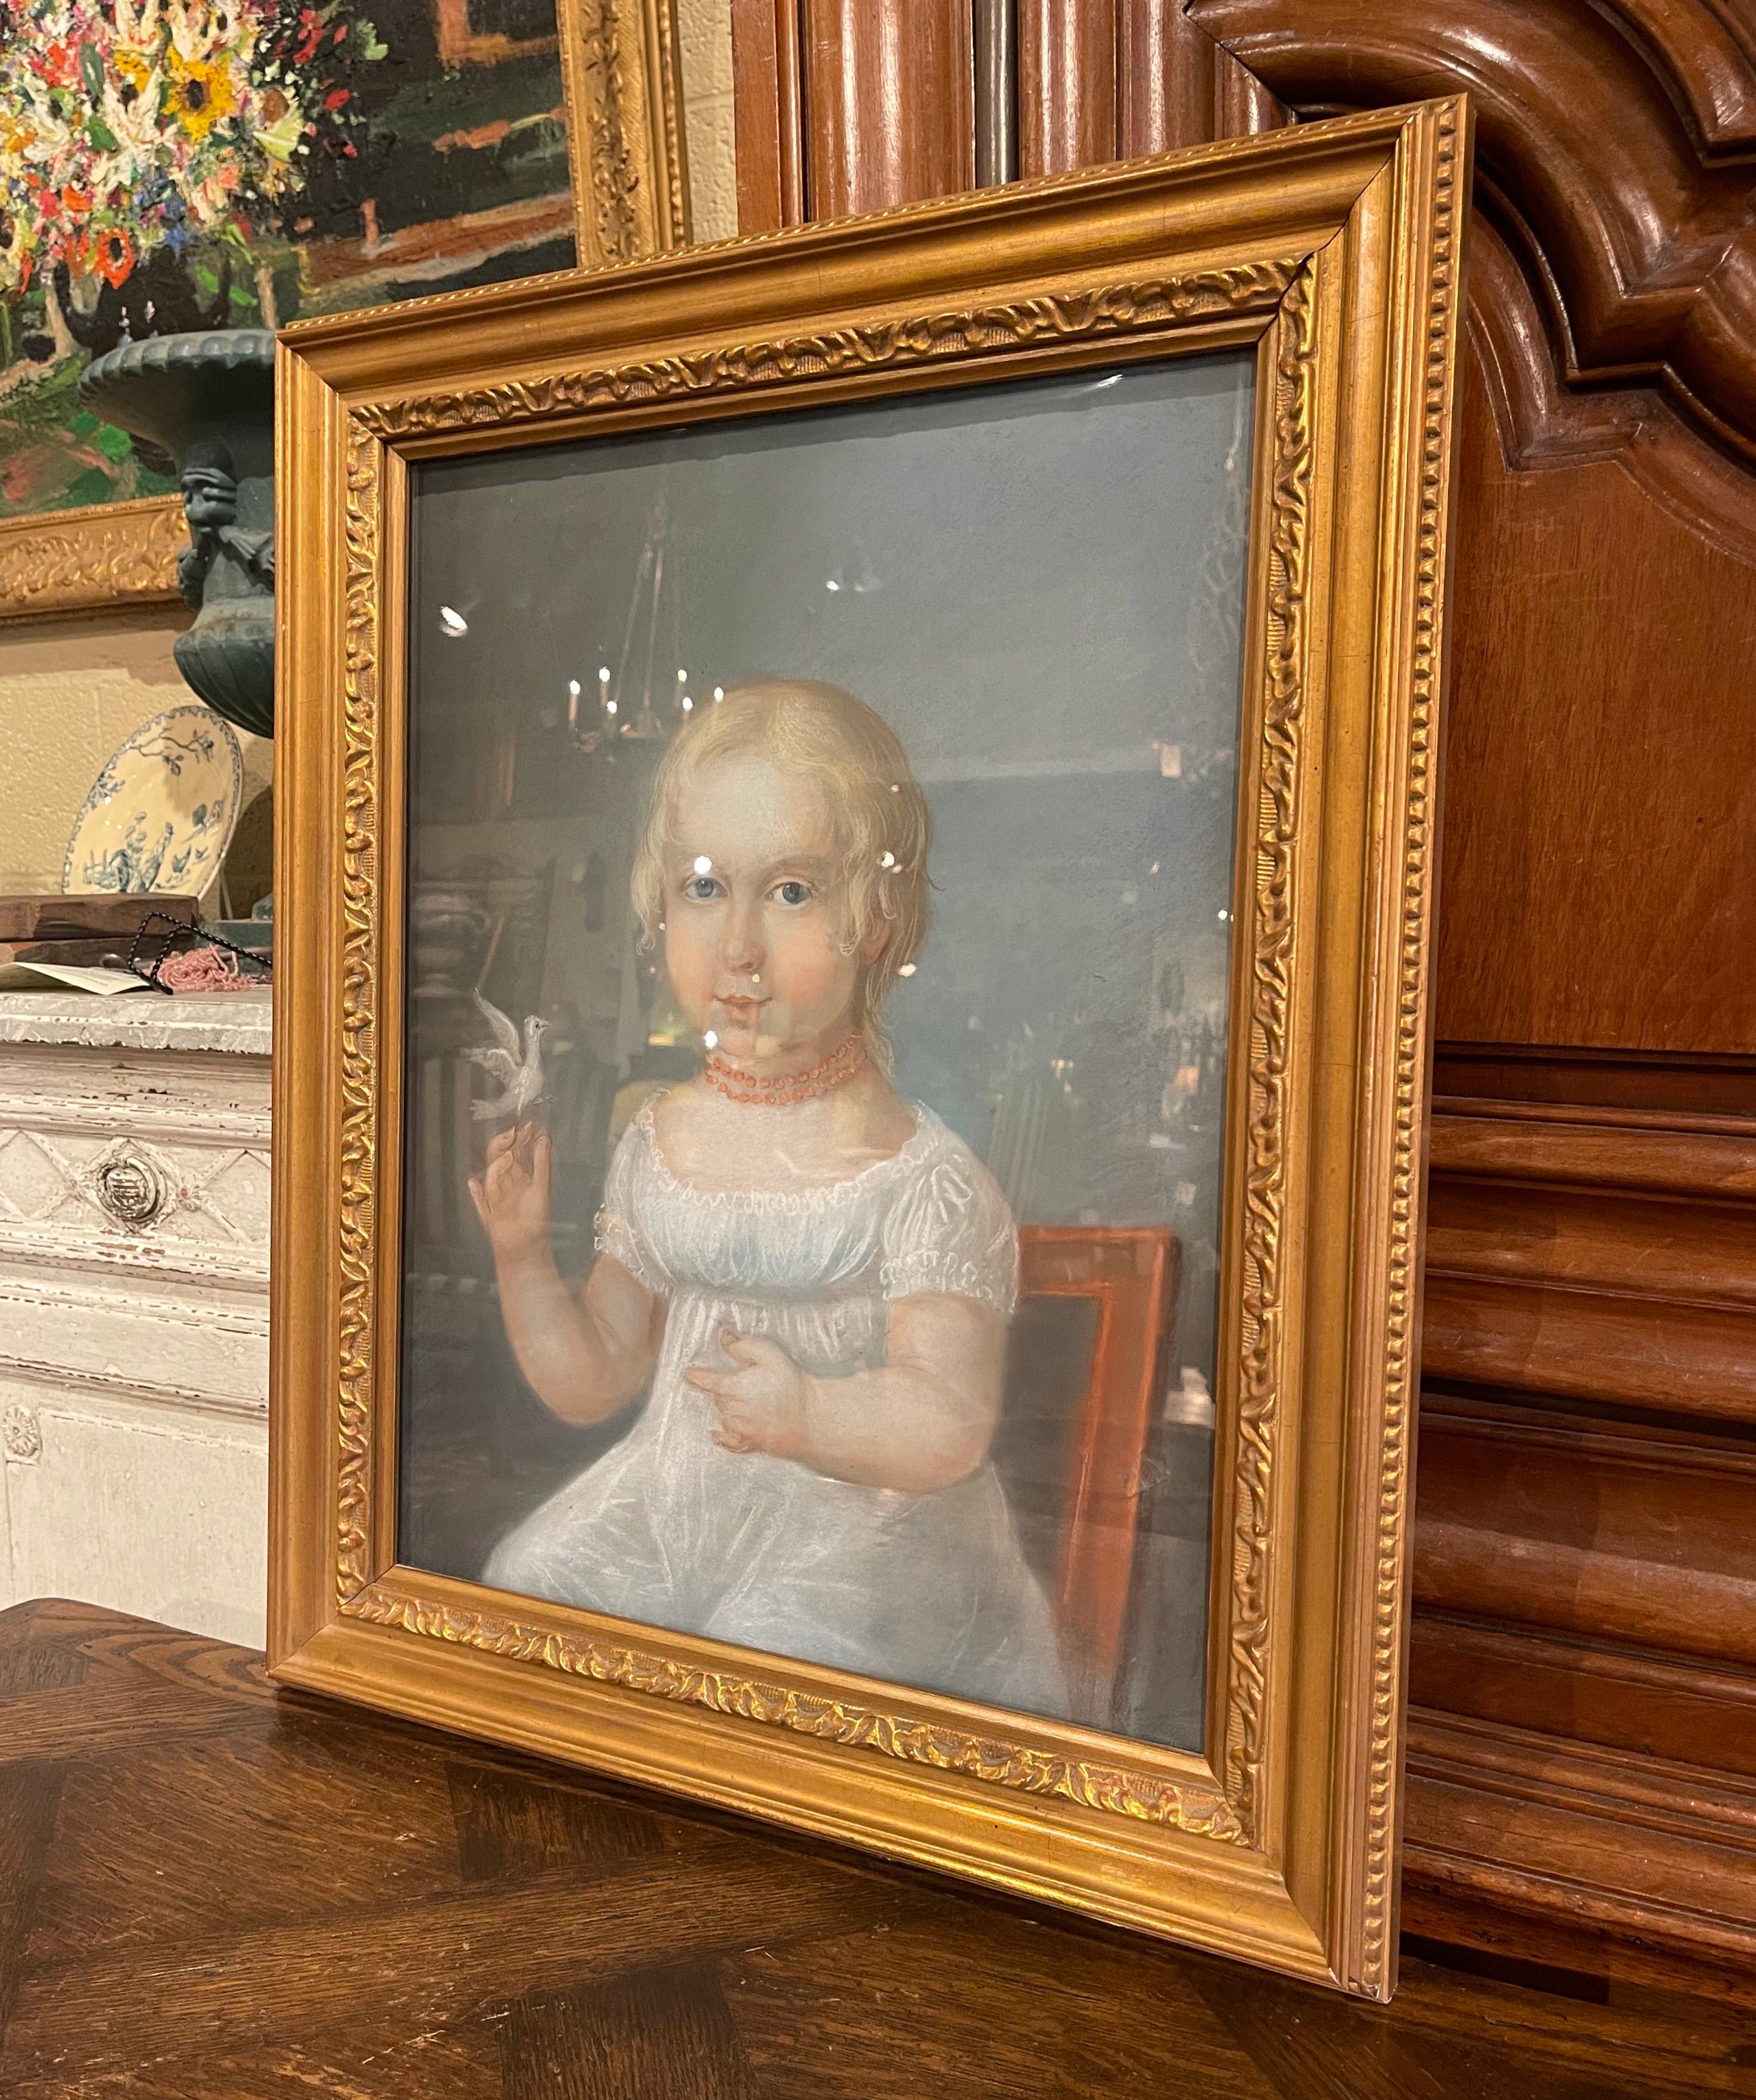 Decorate a study, bedroom, or living space with this beautiful antique pastel masterpiece. Created in France circa 1880, the artwork depicts a young blonde girl sitting in a chair seemingly gazing at the painter, dressed in a 19th-century white